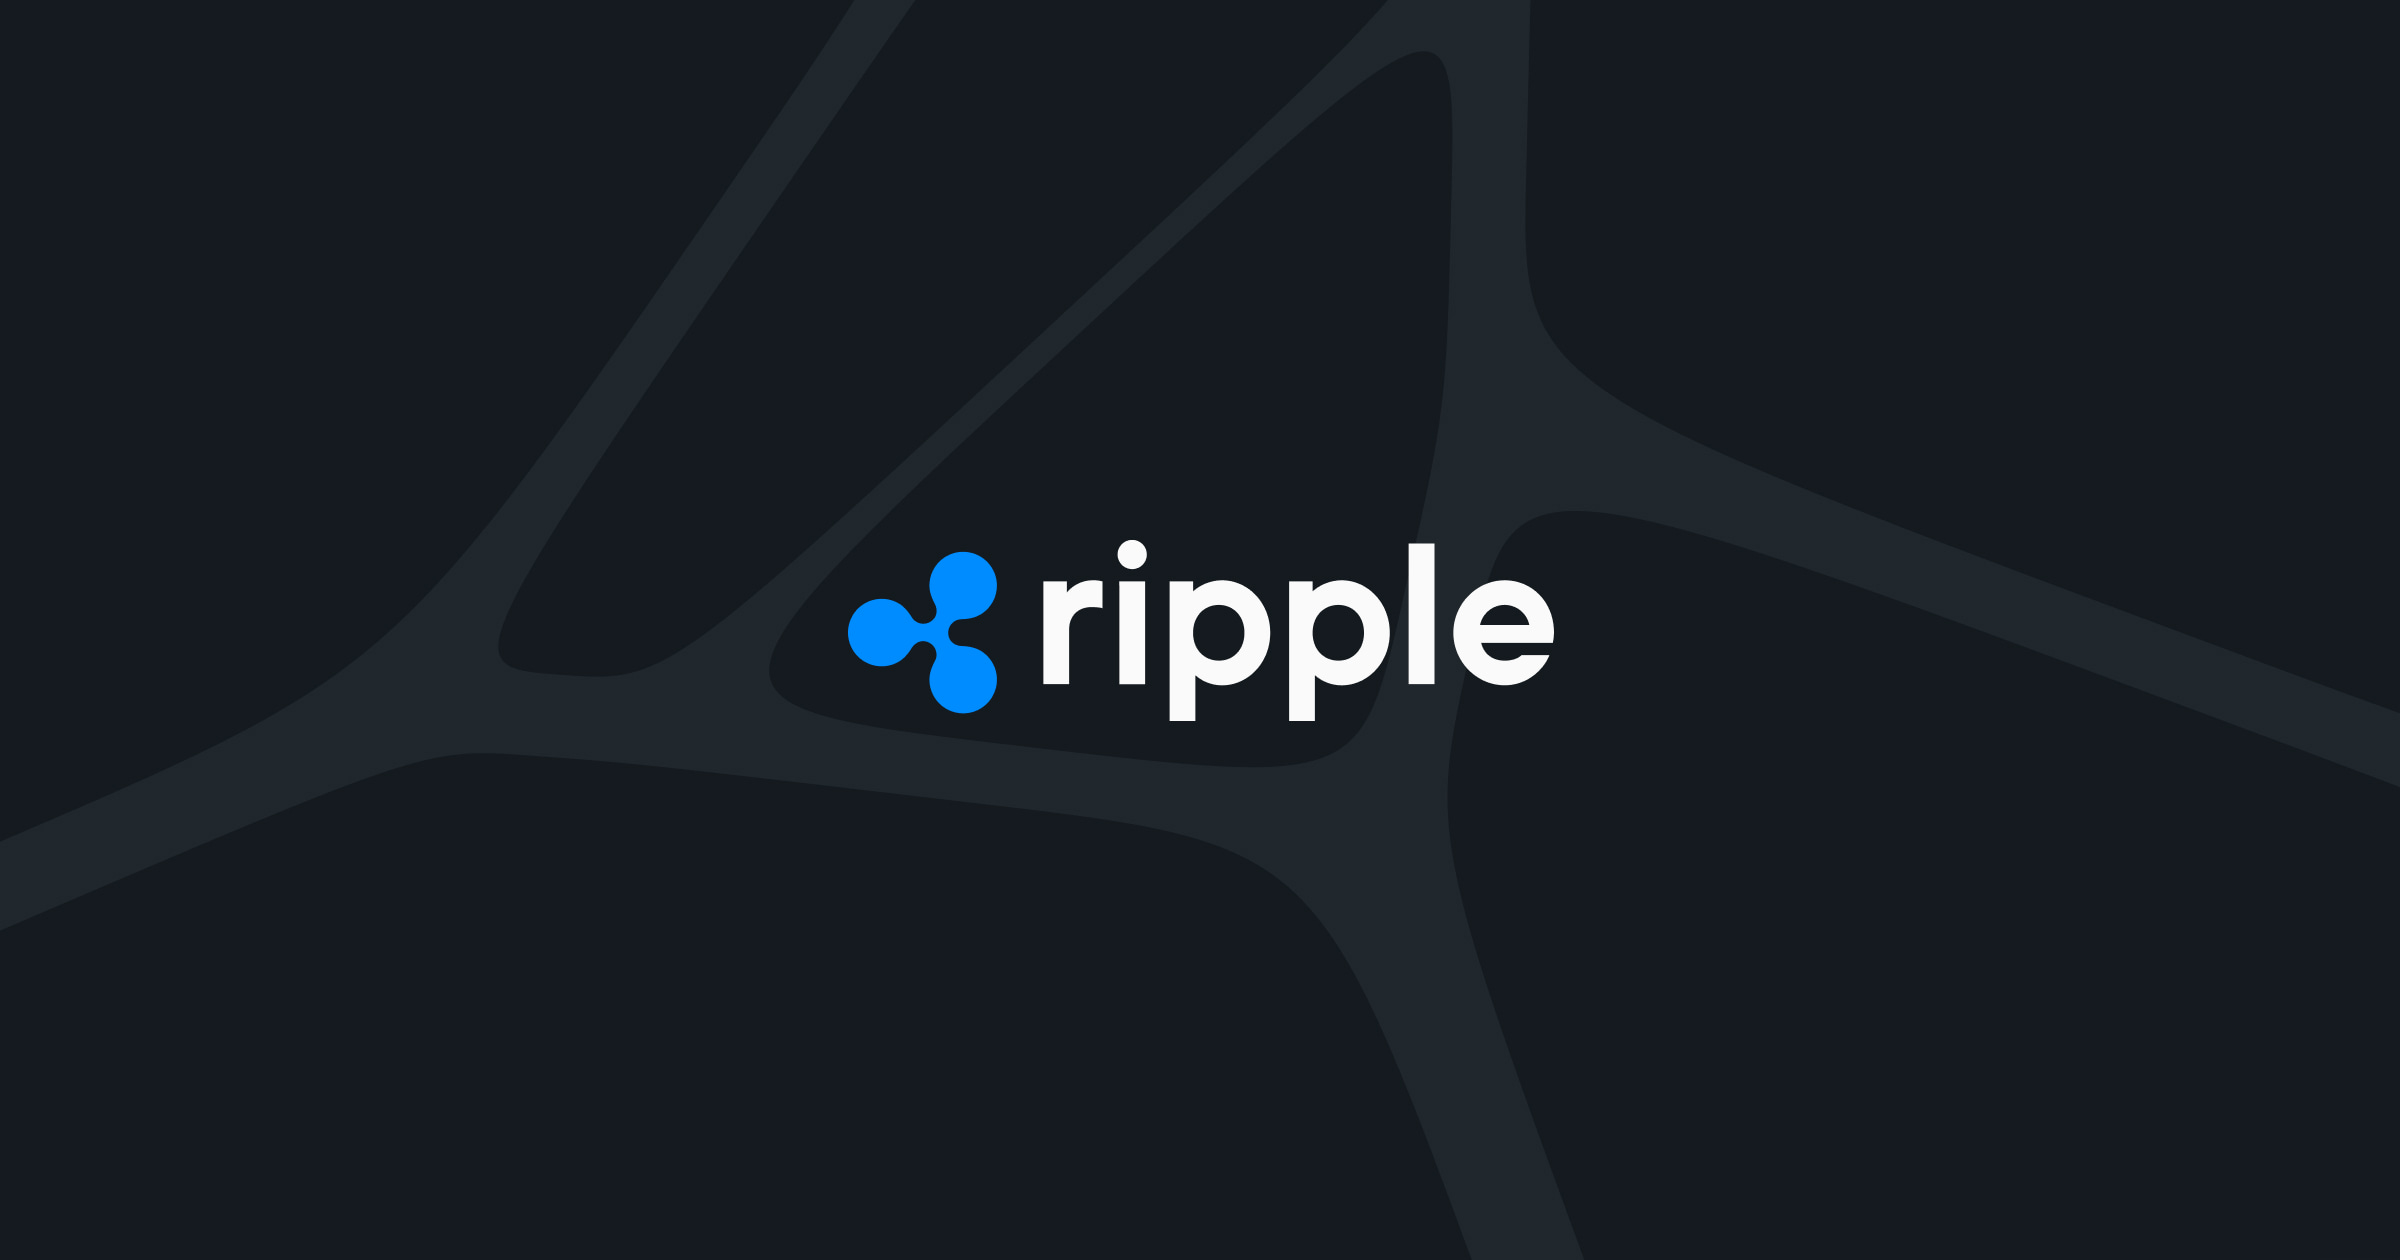 ripple-expands-into-africa-partnering-with-mfs-africa-to-bring-the-benefits-of-crypto-enabled-payments-to-the-continent-or-ripple